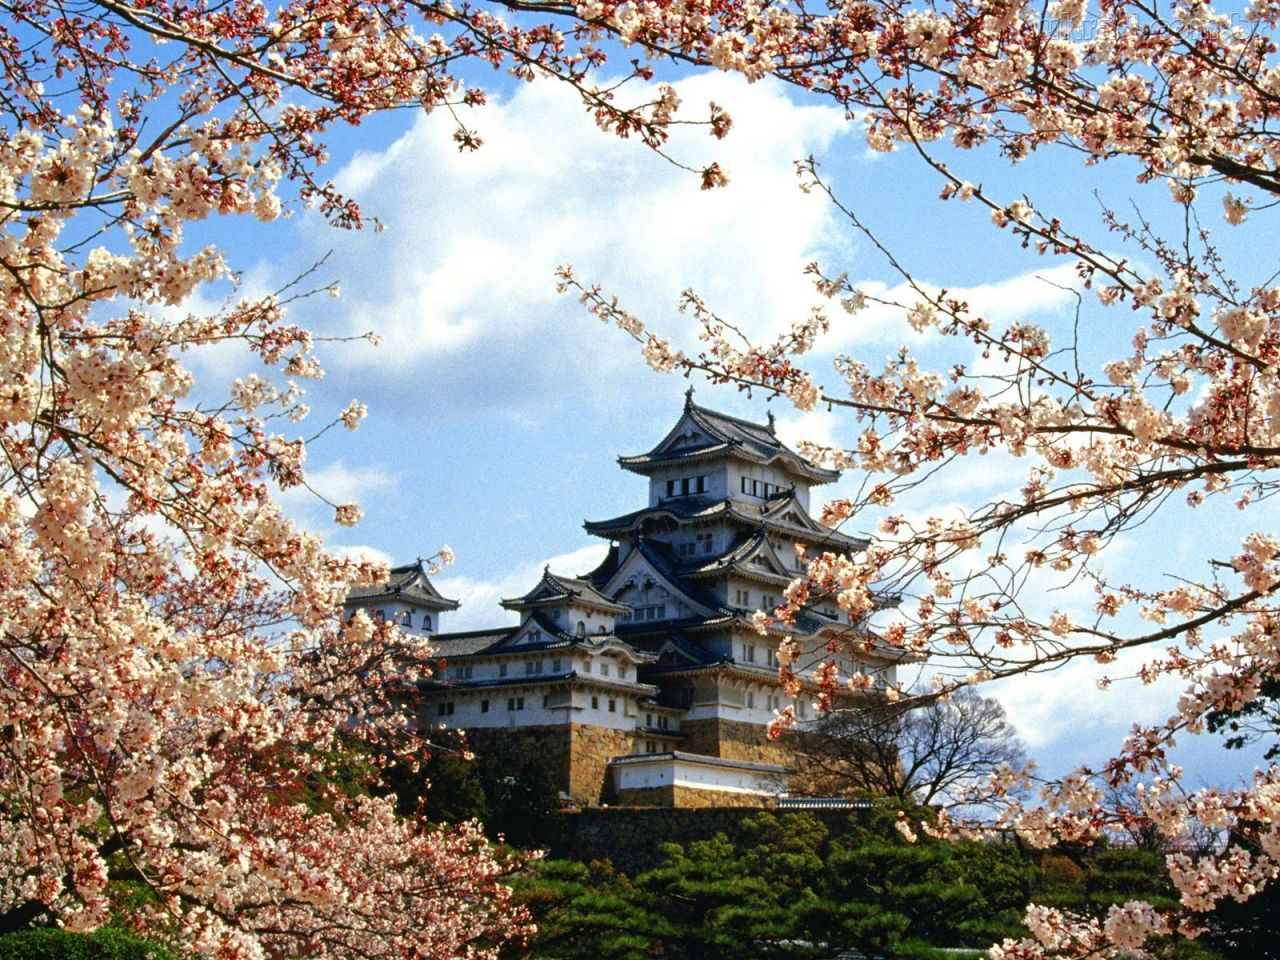 Himeji Castle - history and curiosities